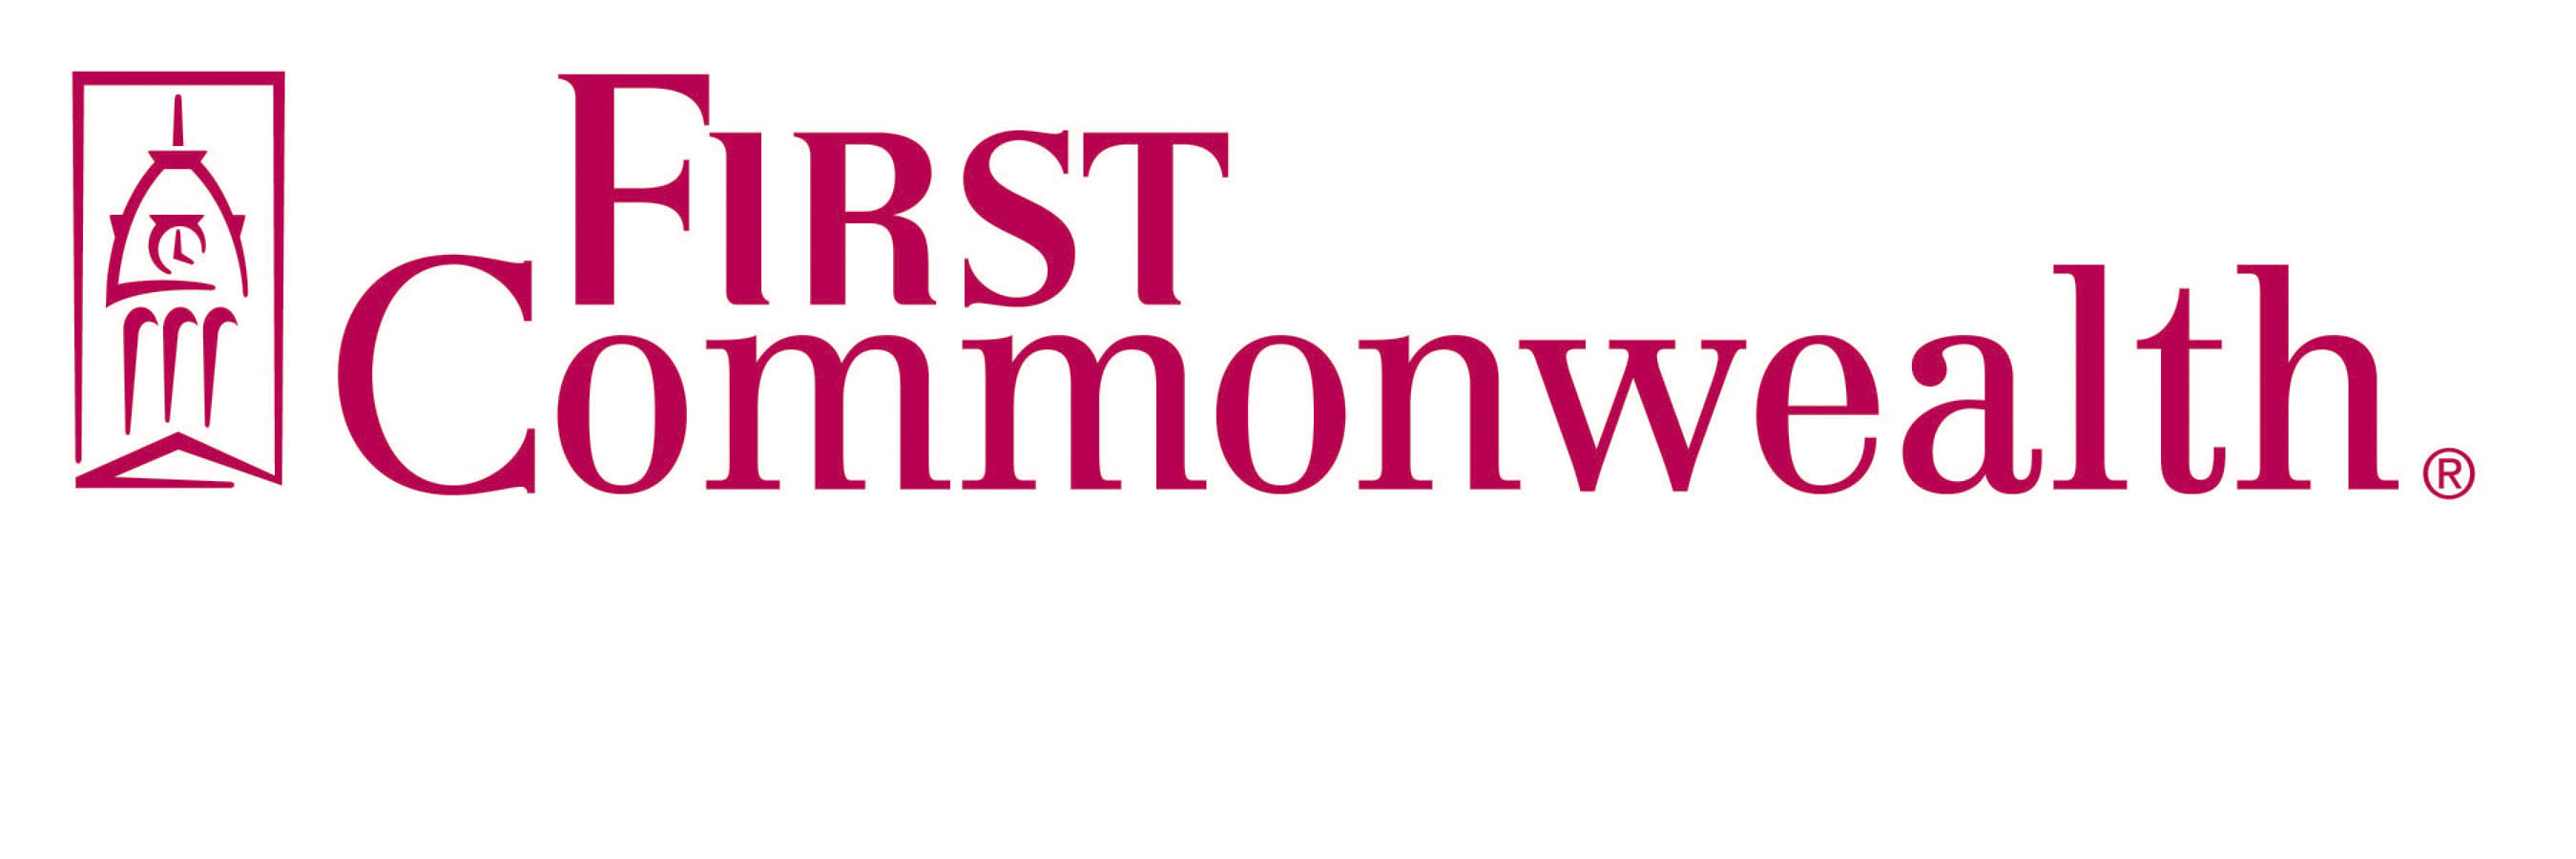 First Commonwealth Financial Corporation logo. (PRNewsFoto/FIRST COMMONWEALTH FINANCIAL) (PRNewsFoto/)